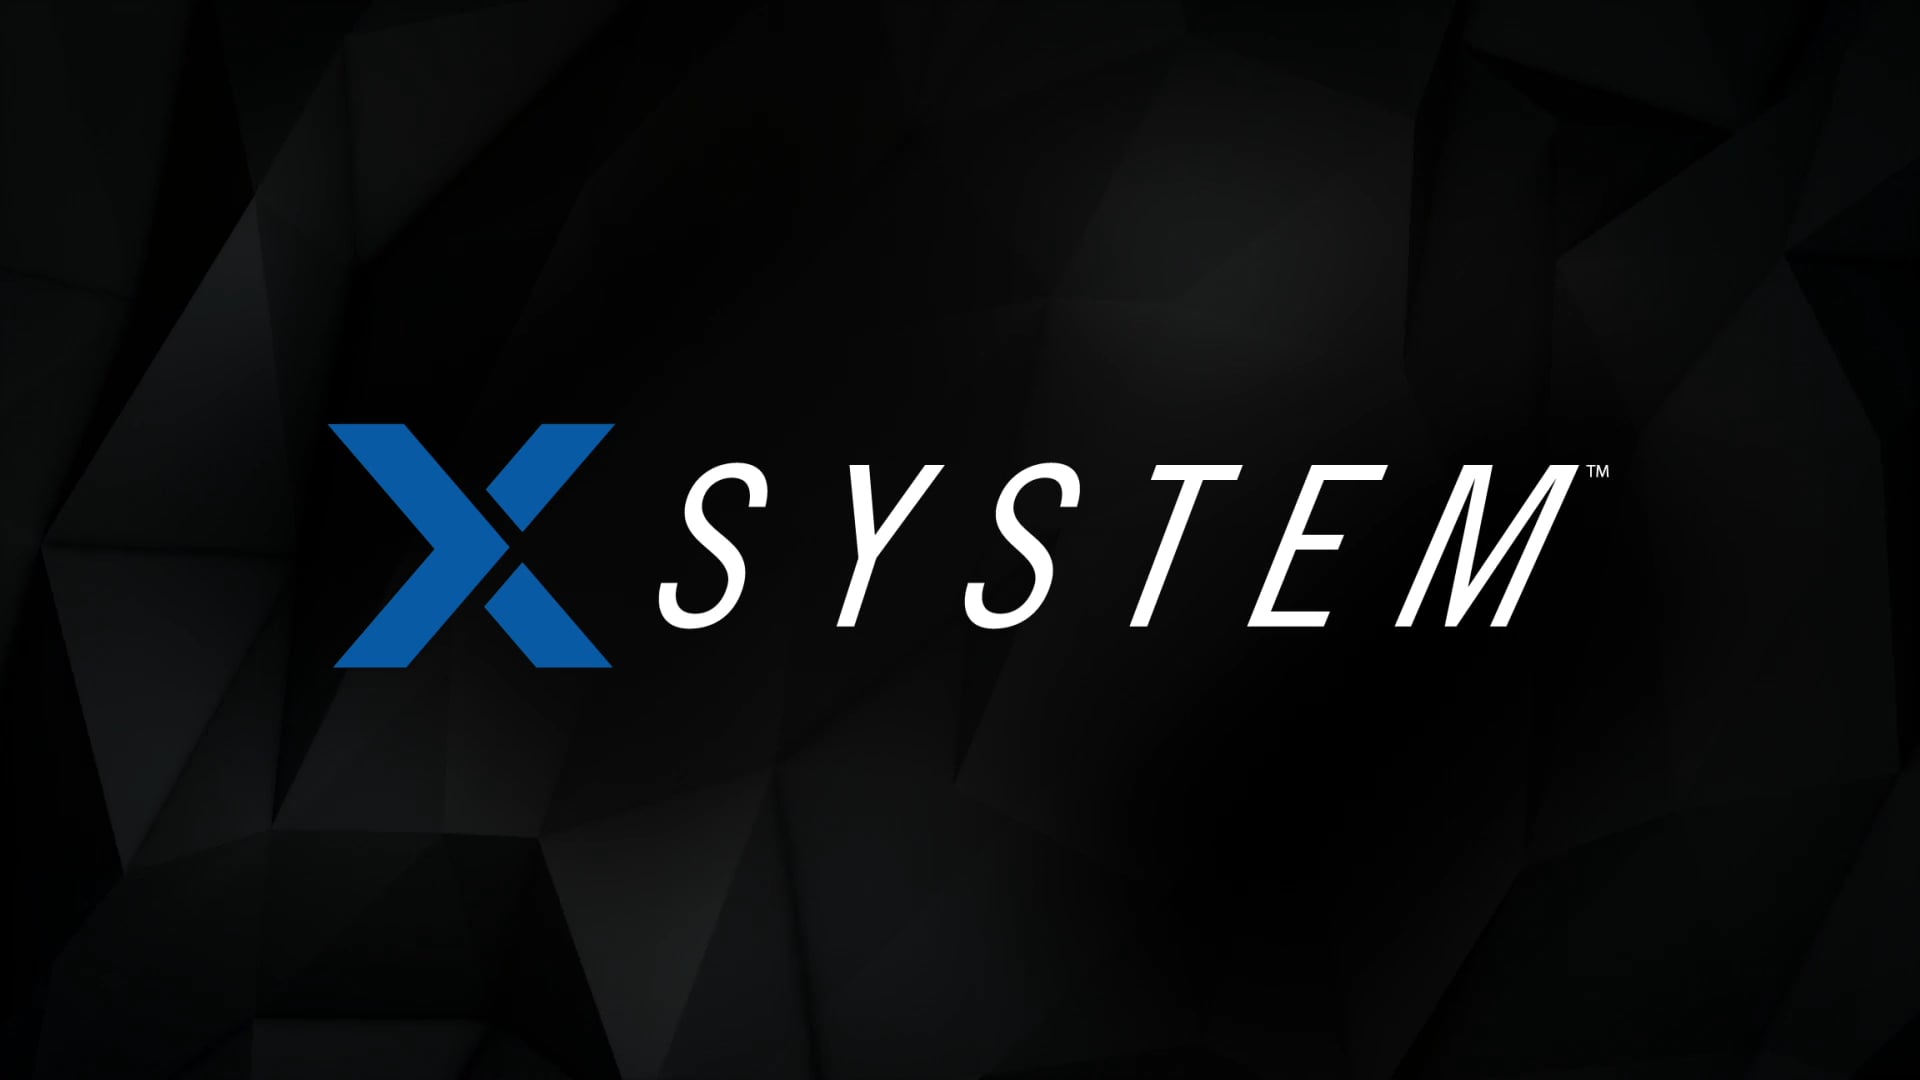 X-System - Delivering the Best in Coaching Headsets.